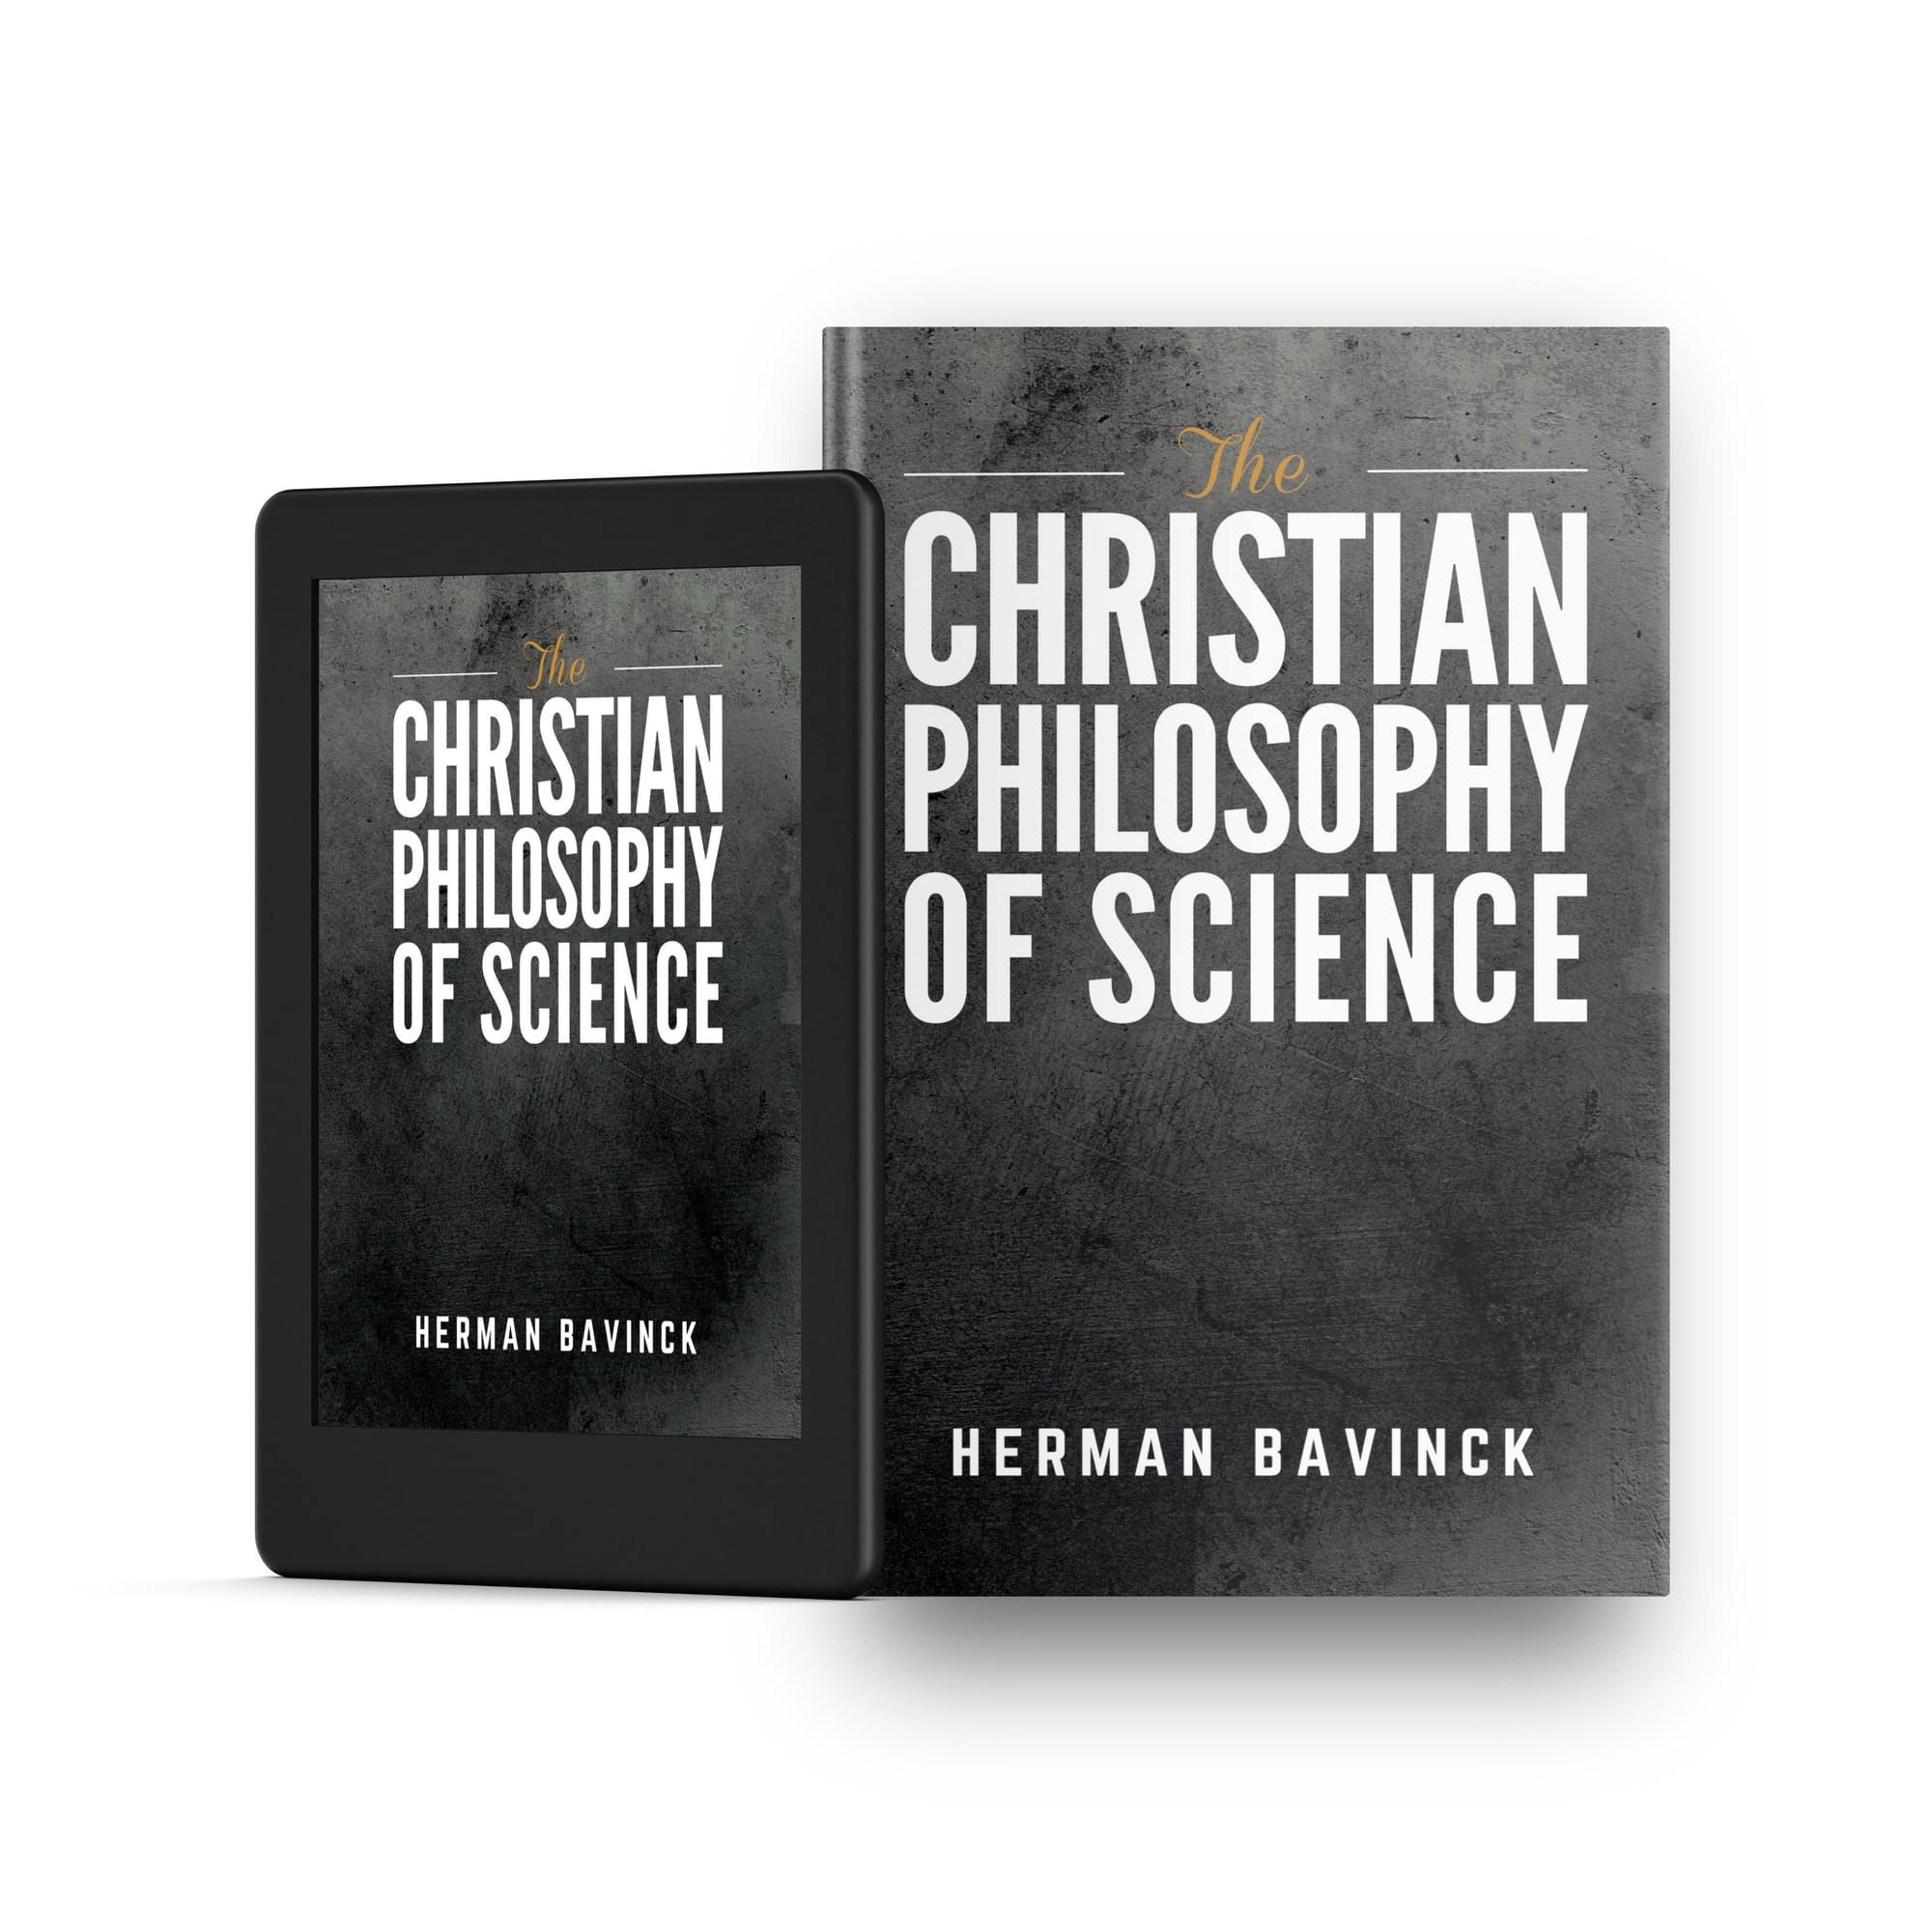 The Christian Philosophy of Science